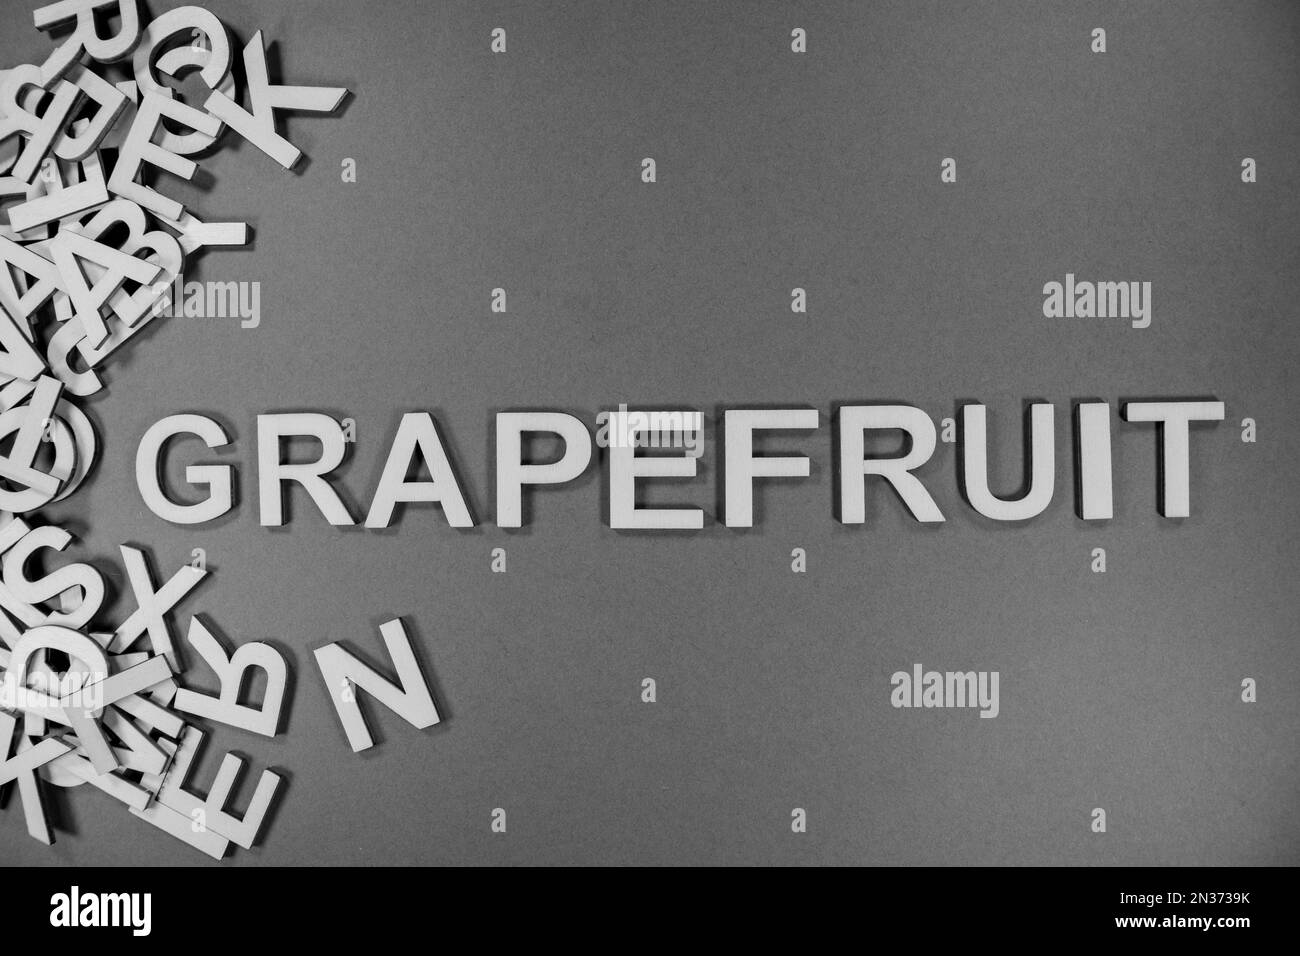 GRAPEFRUIT in wooden English language capital letters spilling from a pile of letters in black and white Stock Photo